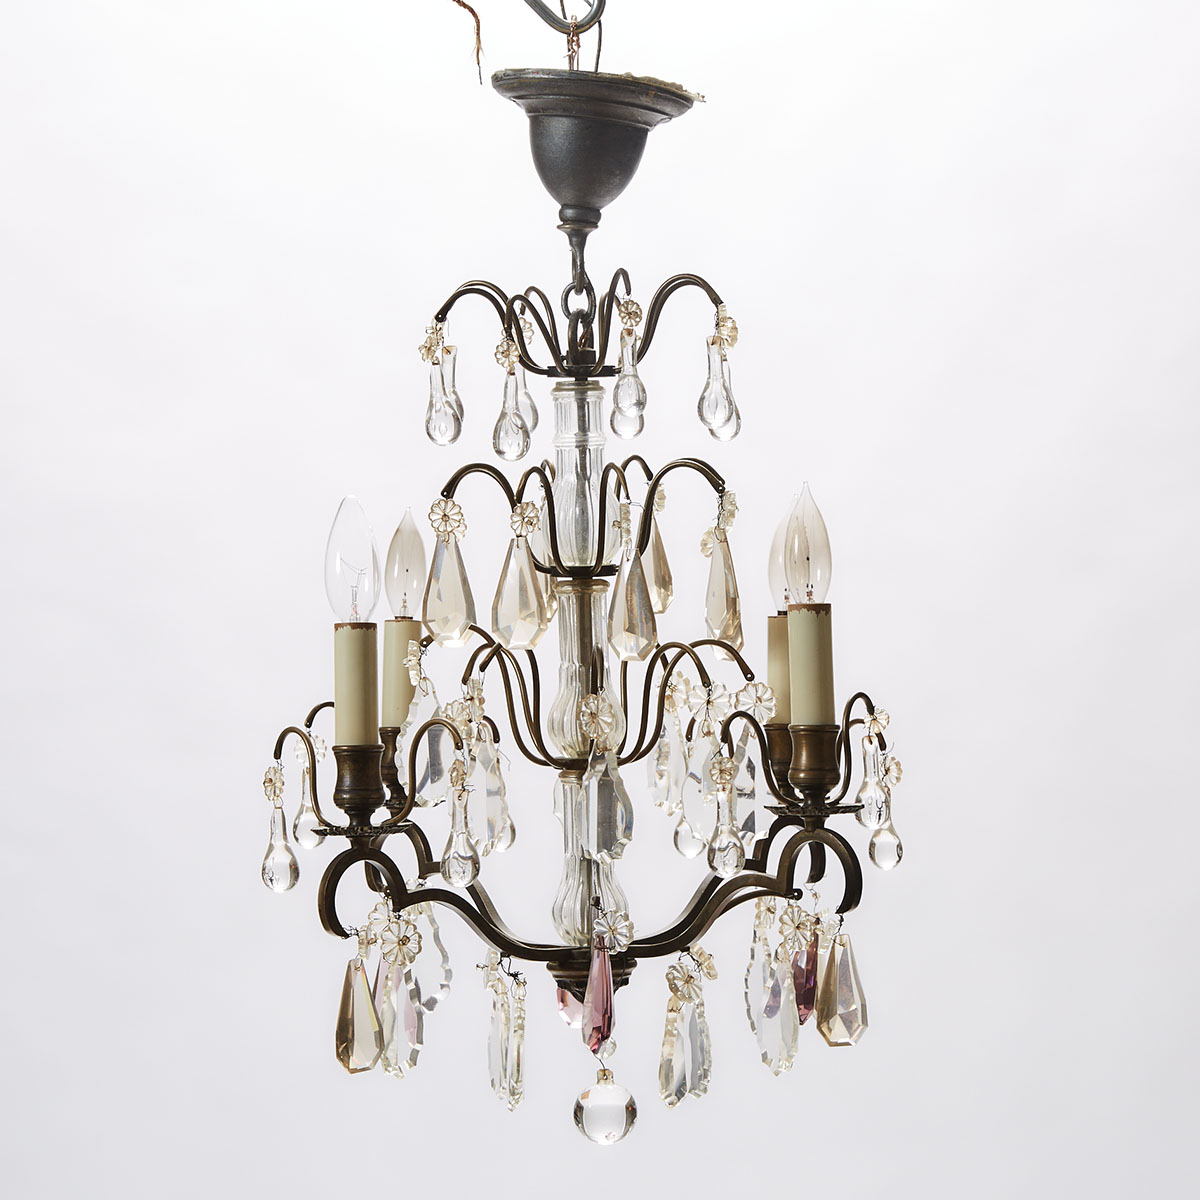 Small Four Light Chandelier, mid 20th century